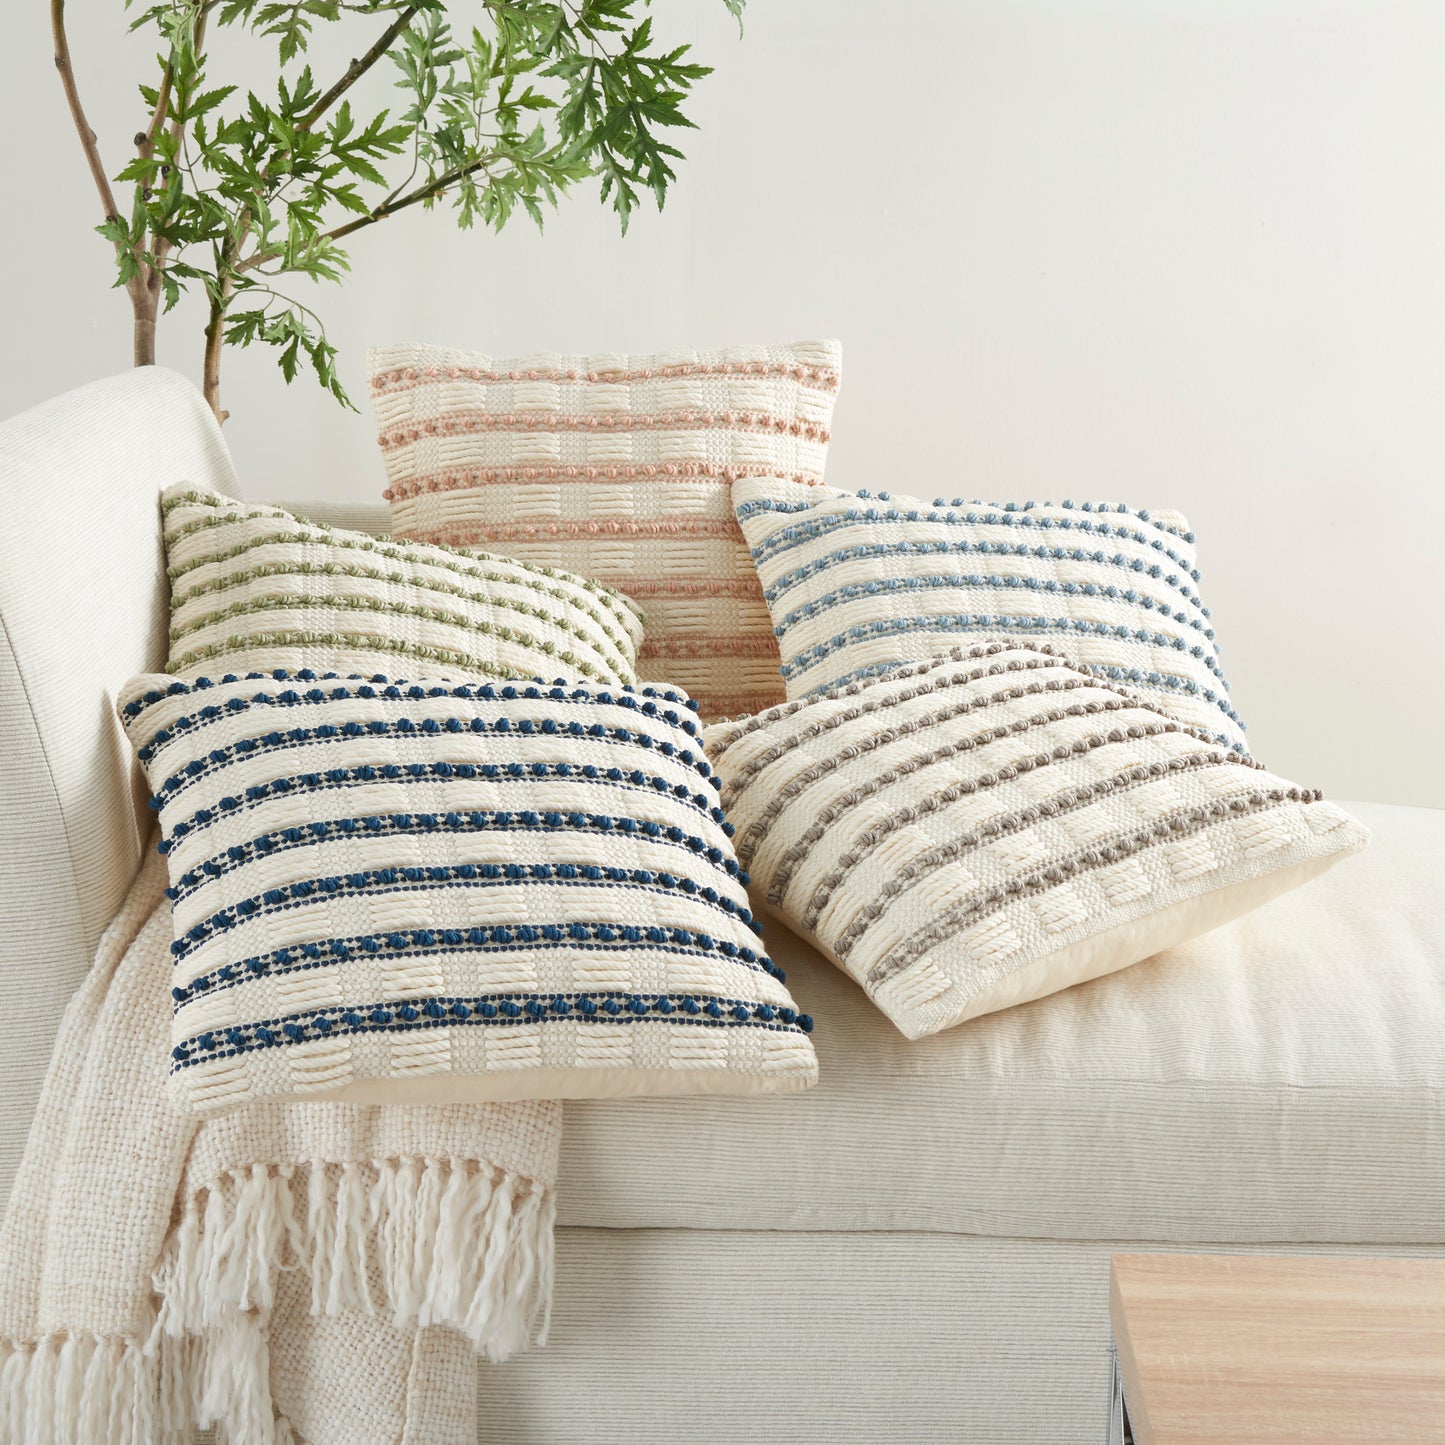 Life Styles GC384 Cotton Woven Lines And Dots Throw Pillow From Mina Victory By Nourison Rugs